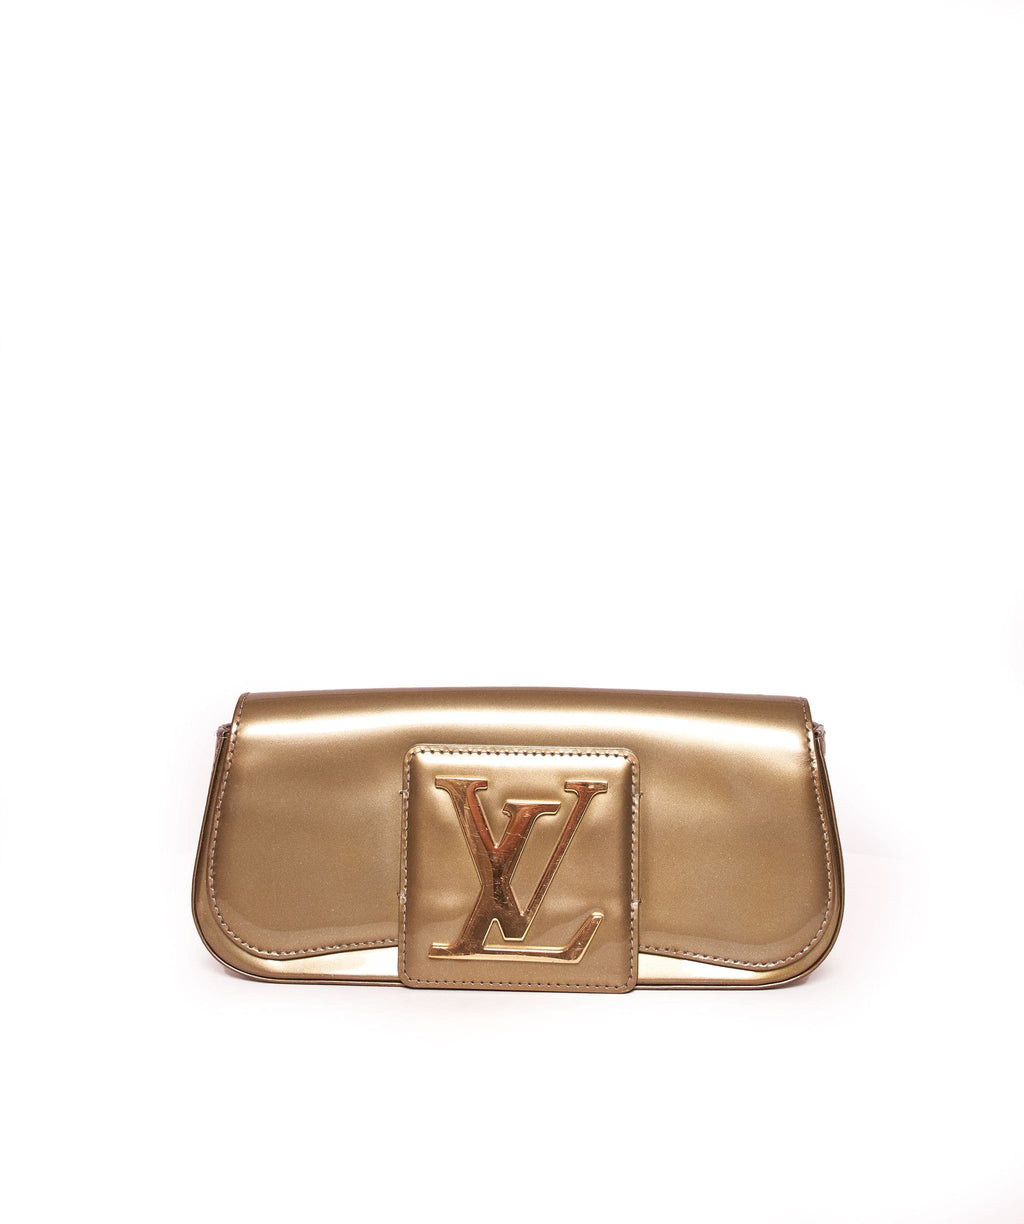 Sobe patent leather clutch bag Louis Vuitton Green in Patent